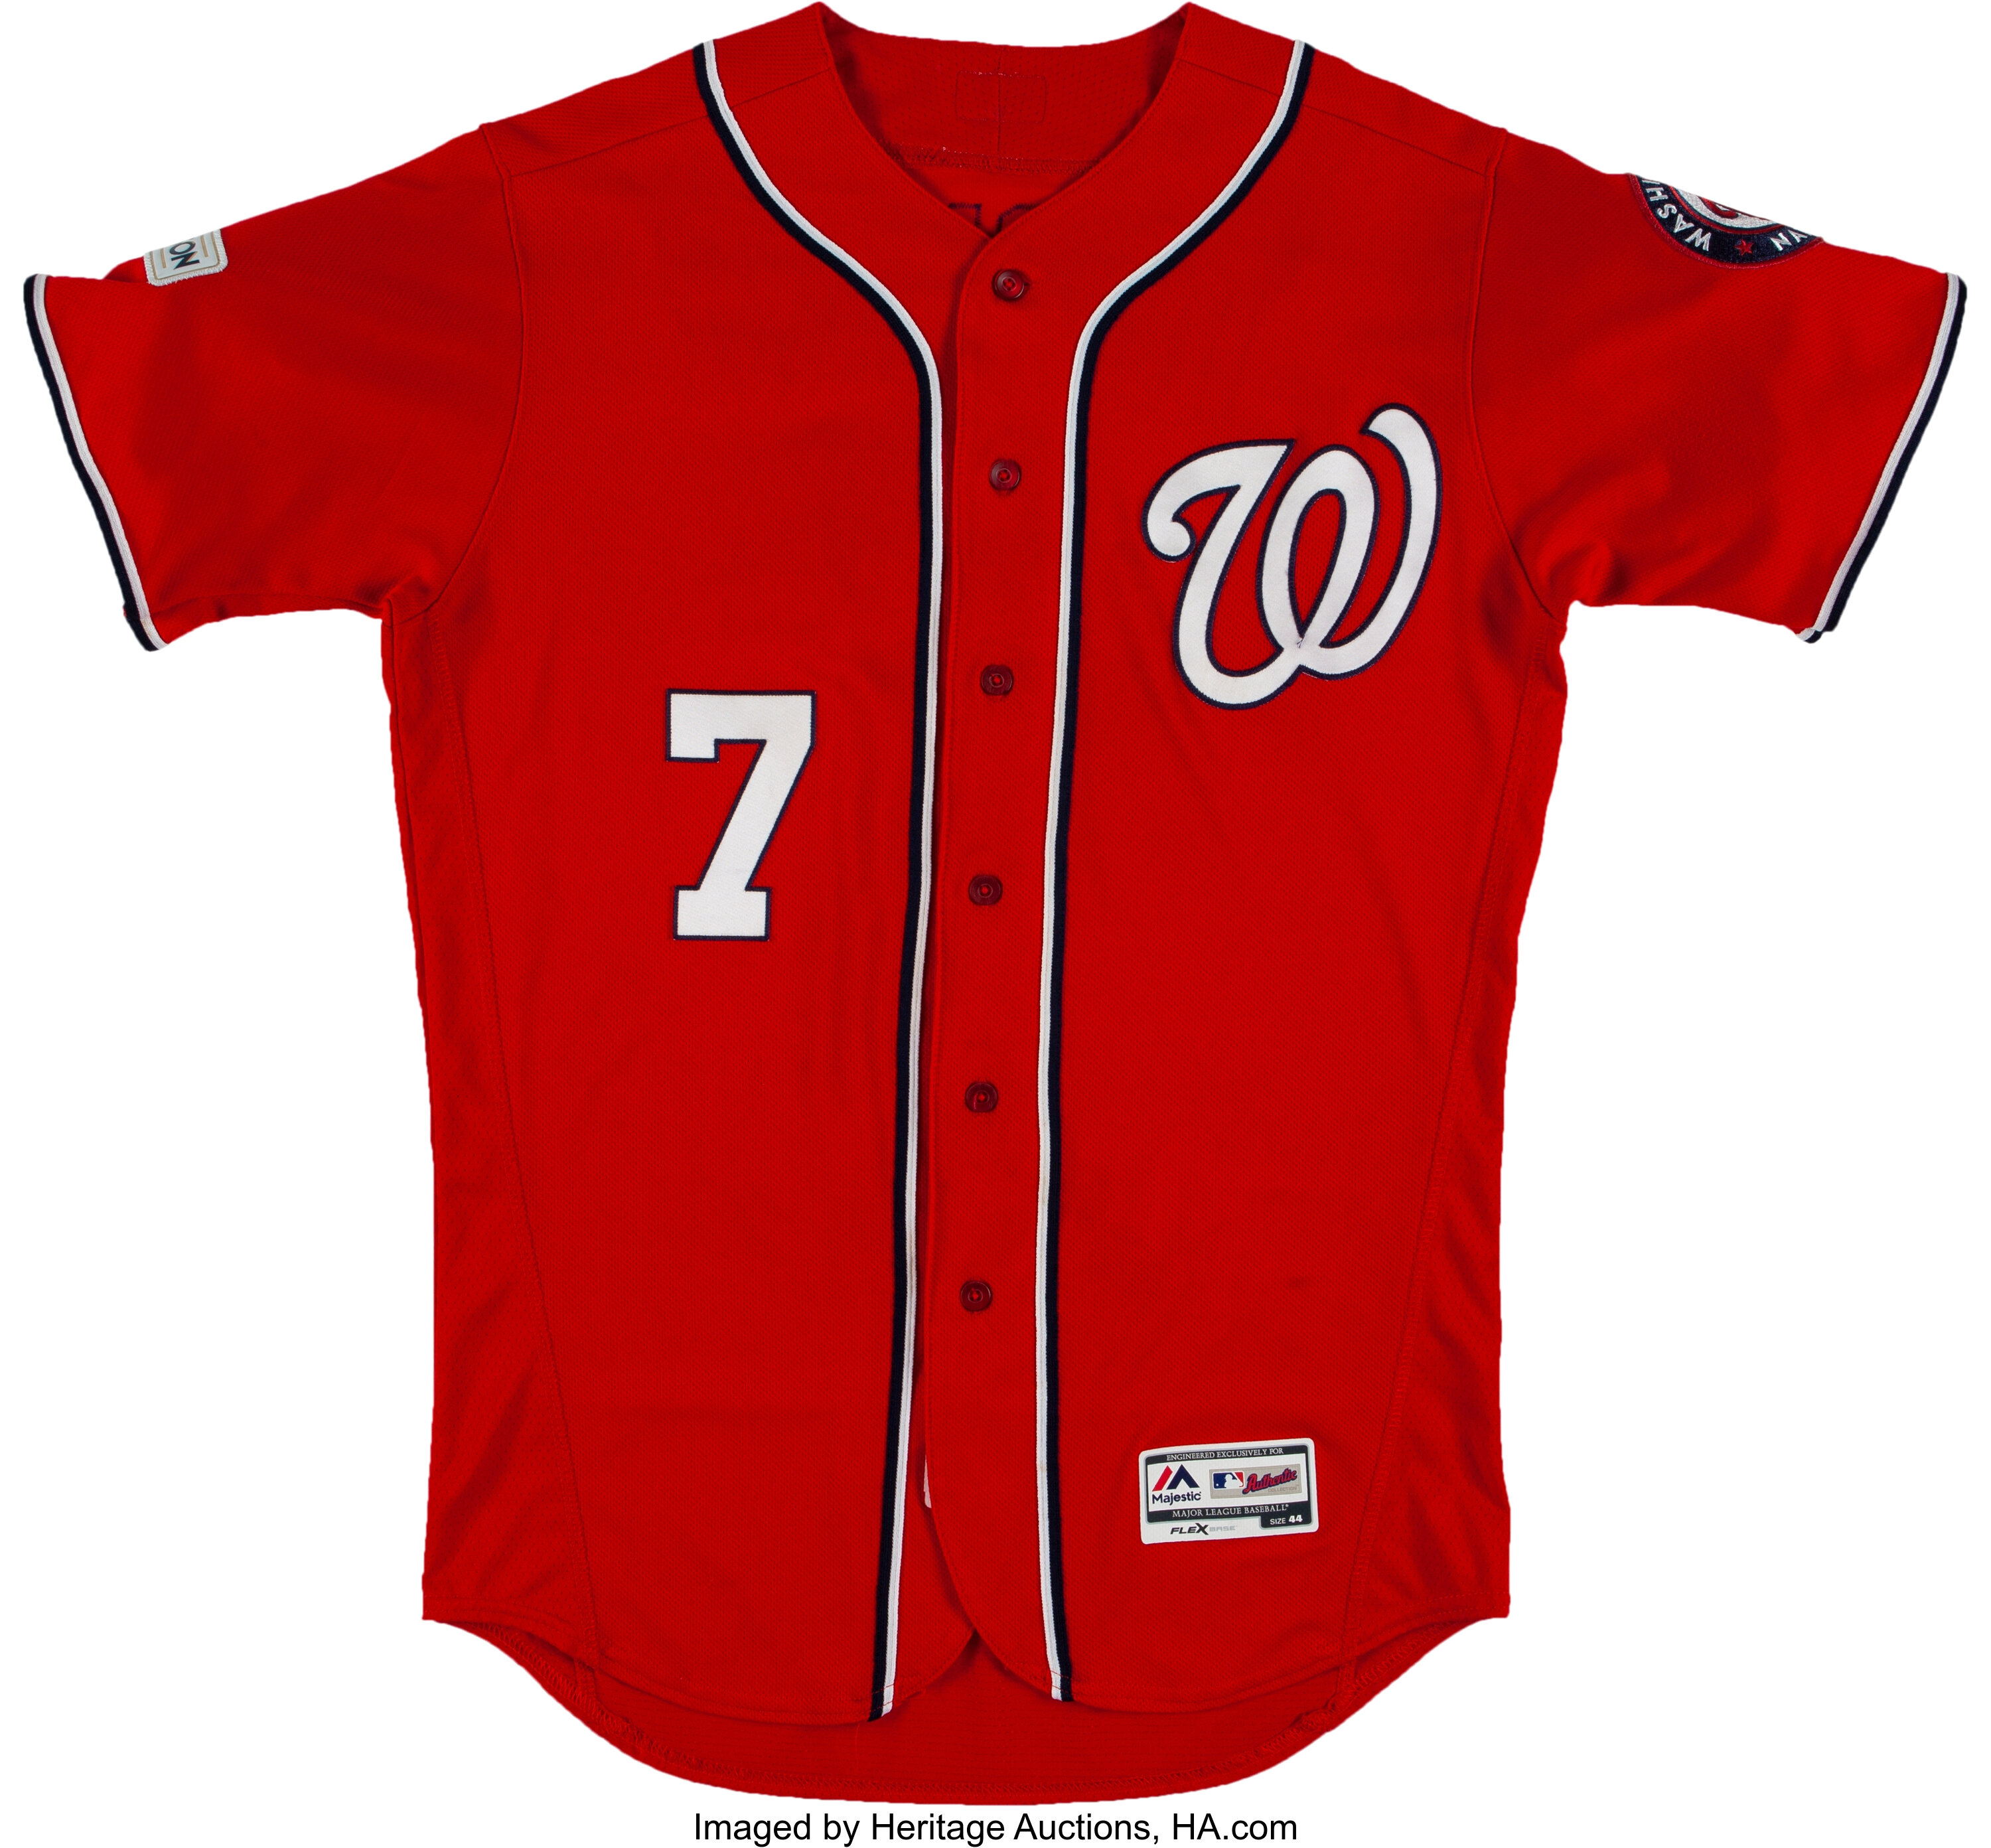 Sports Memorabilia Auctions & Appraisals - Game Used Jerseys